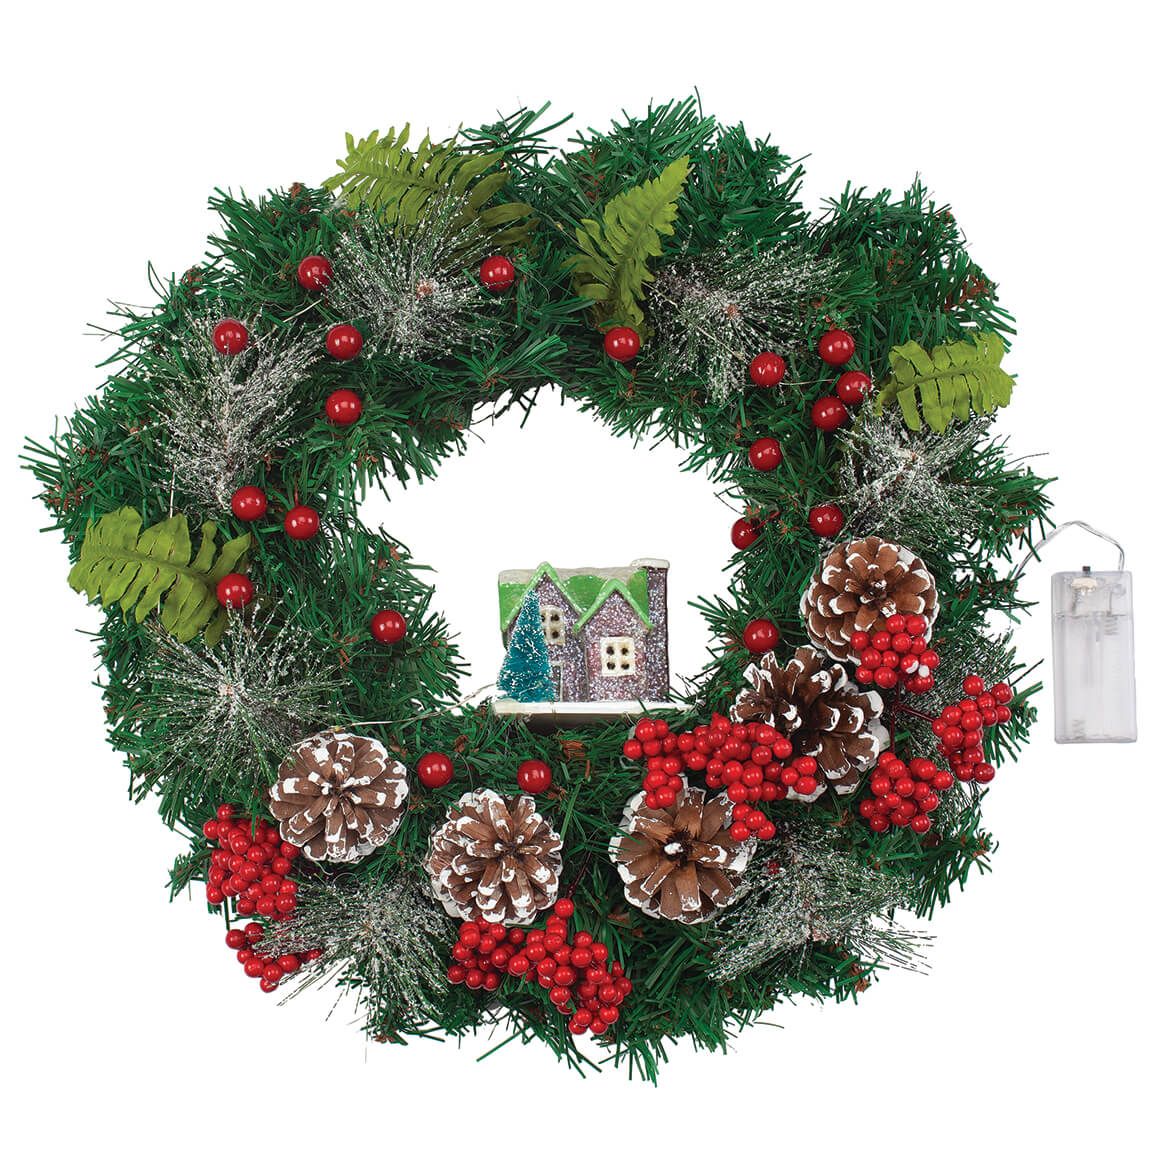 Lighted Holiday Wreath with House + '-' + 368201